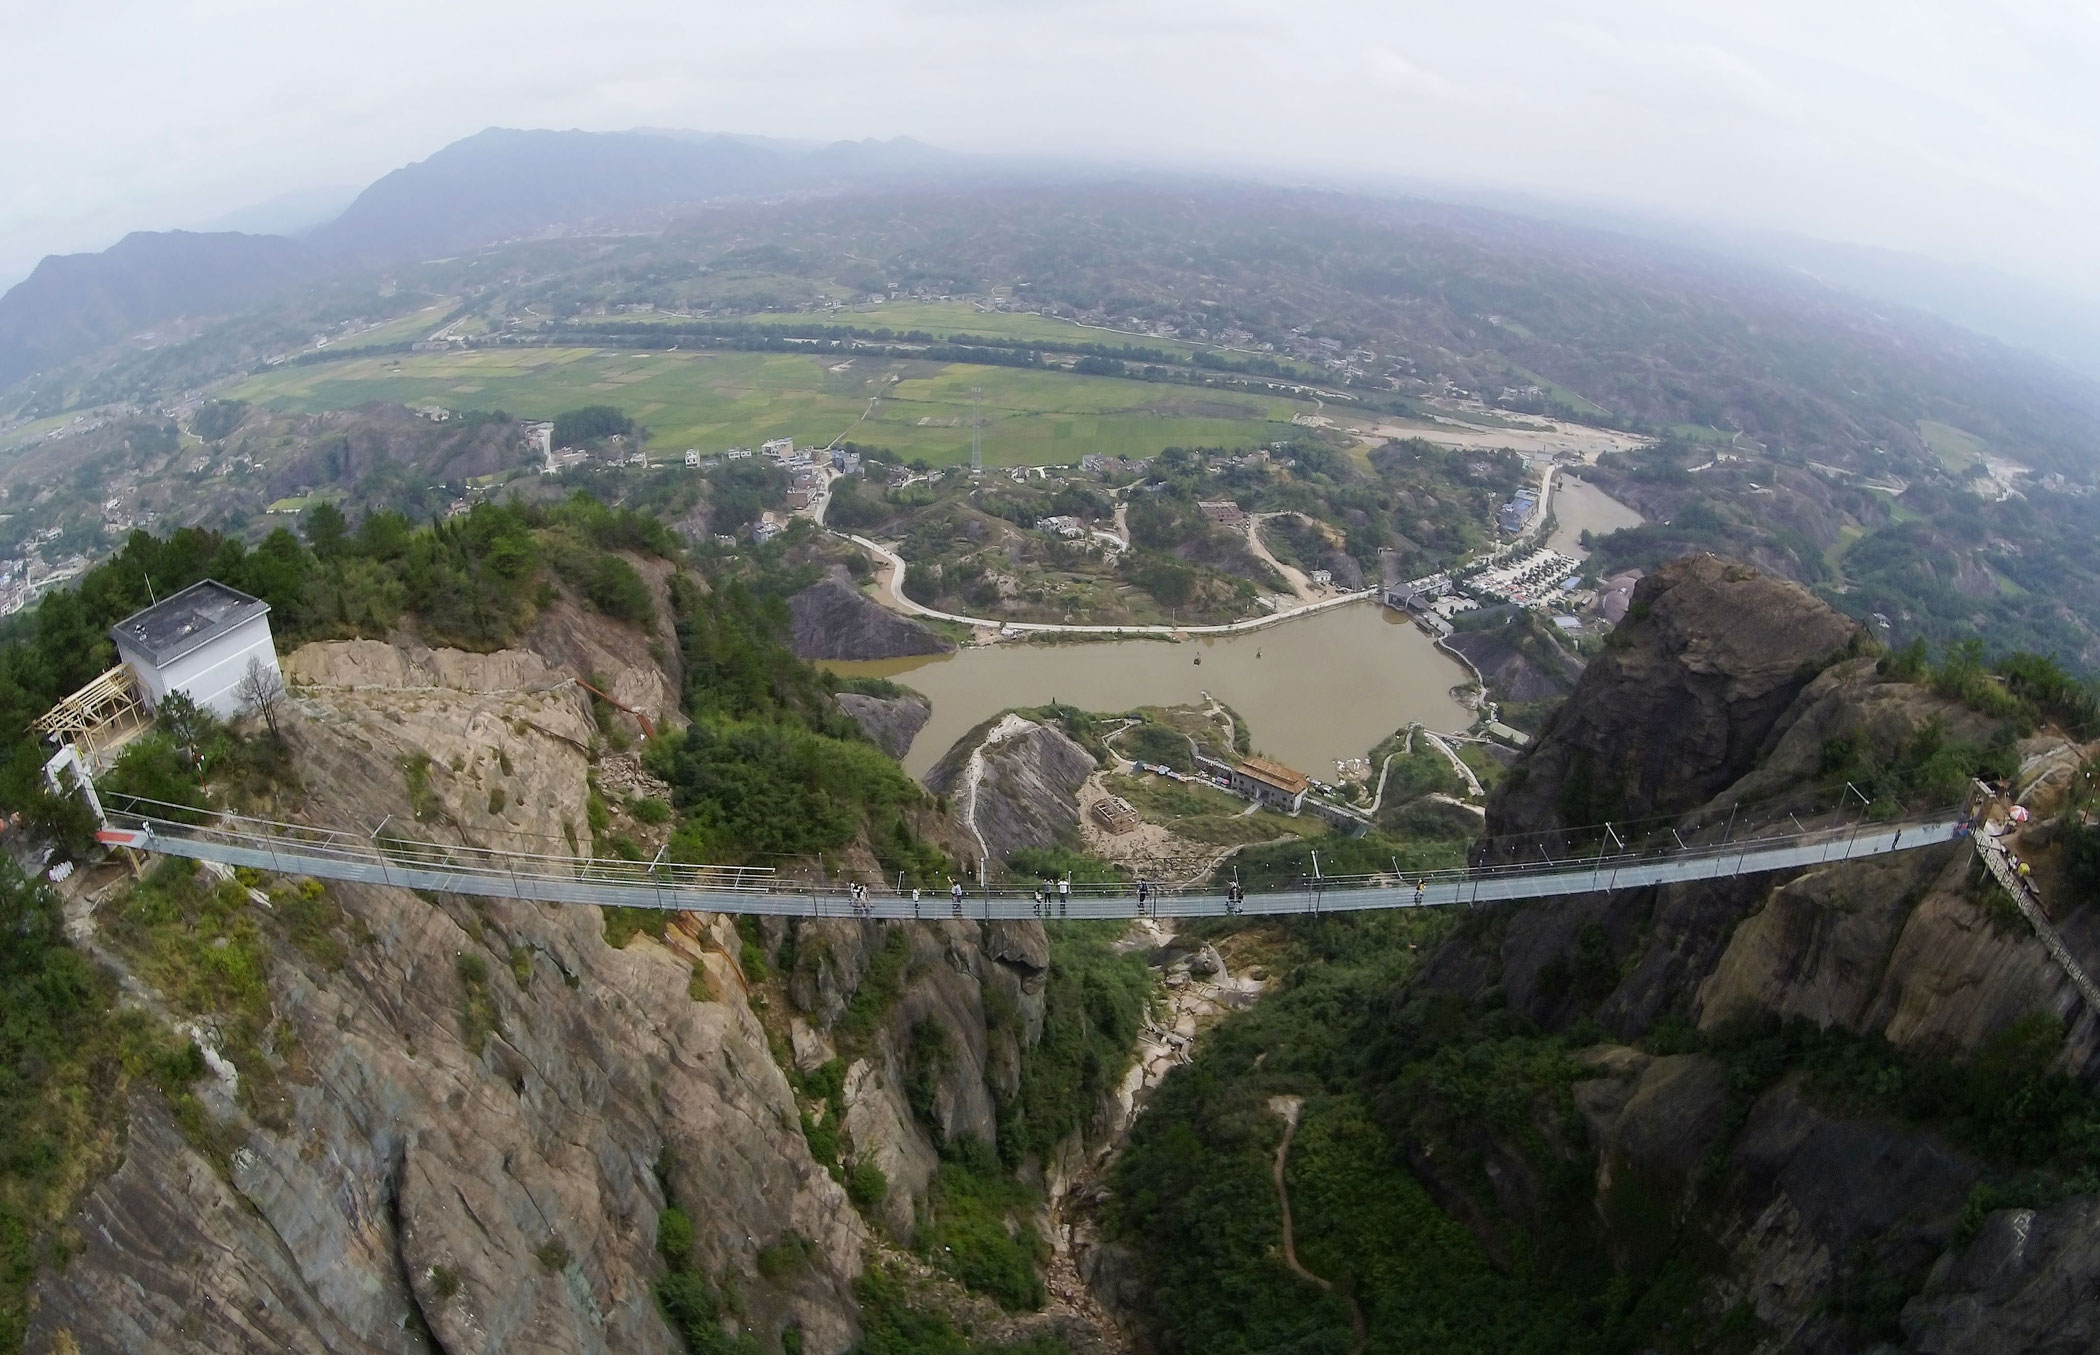 Tourists walk on a 300-meter-long glass suspension bridge at the Shiniuzhai National Geological Park in Pingjiang County, China, on Sept. 24, 2015. (ChinaFotoPress/Getty Images)